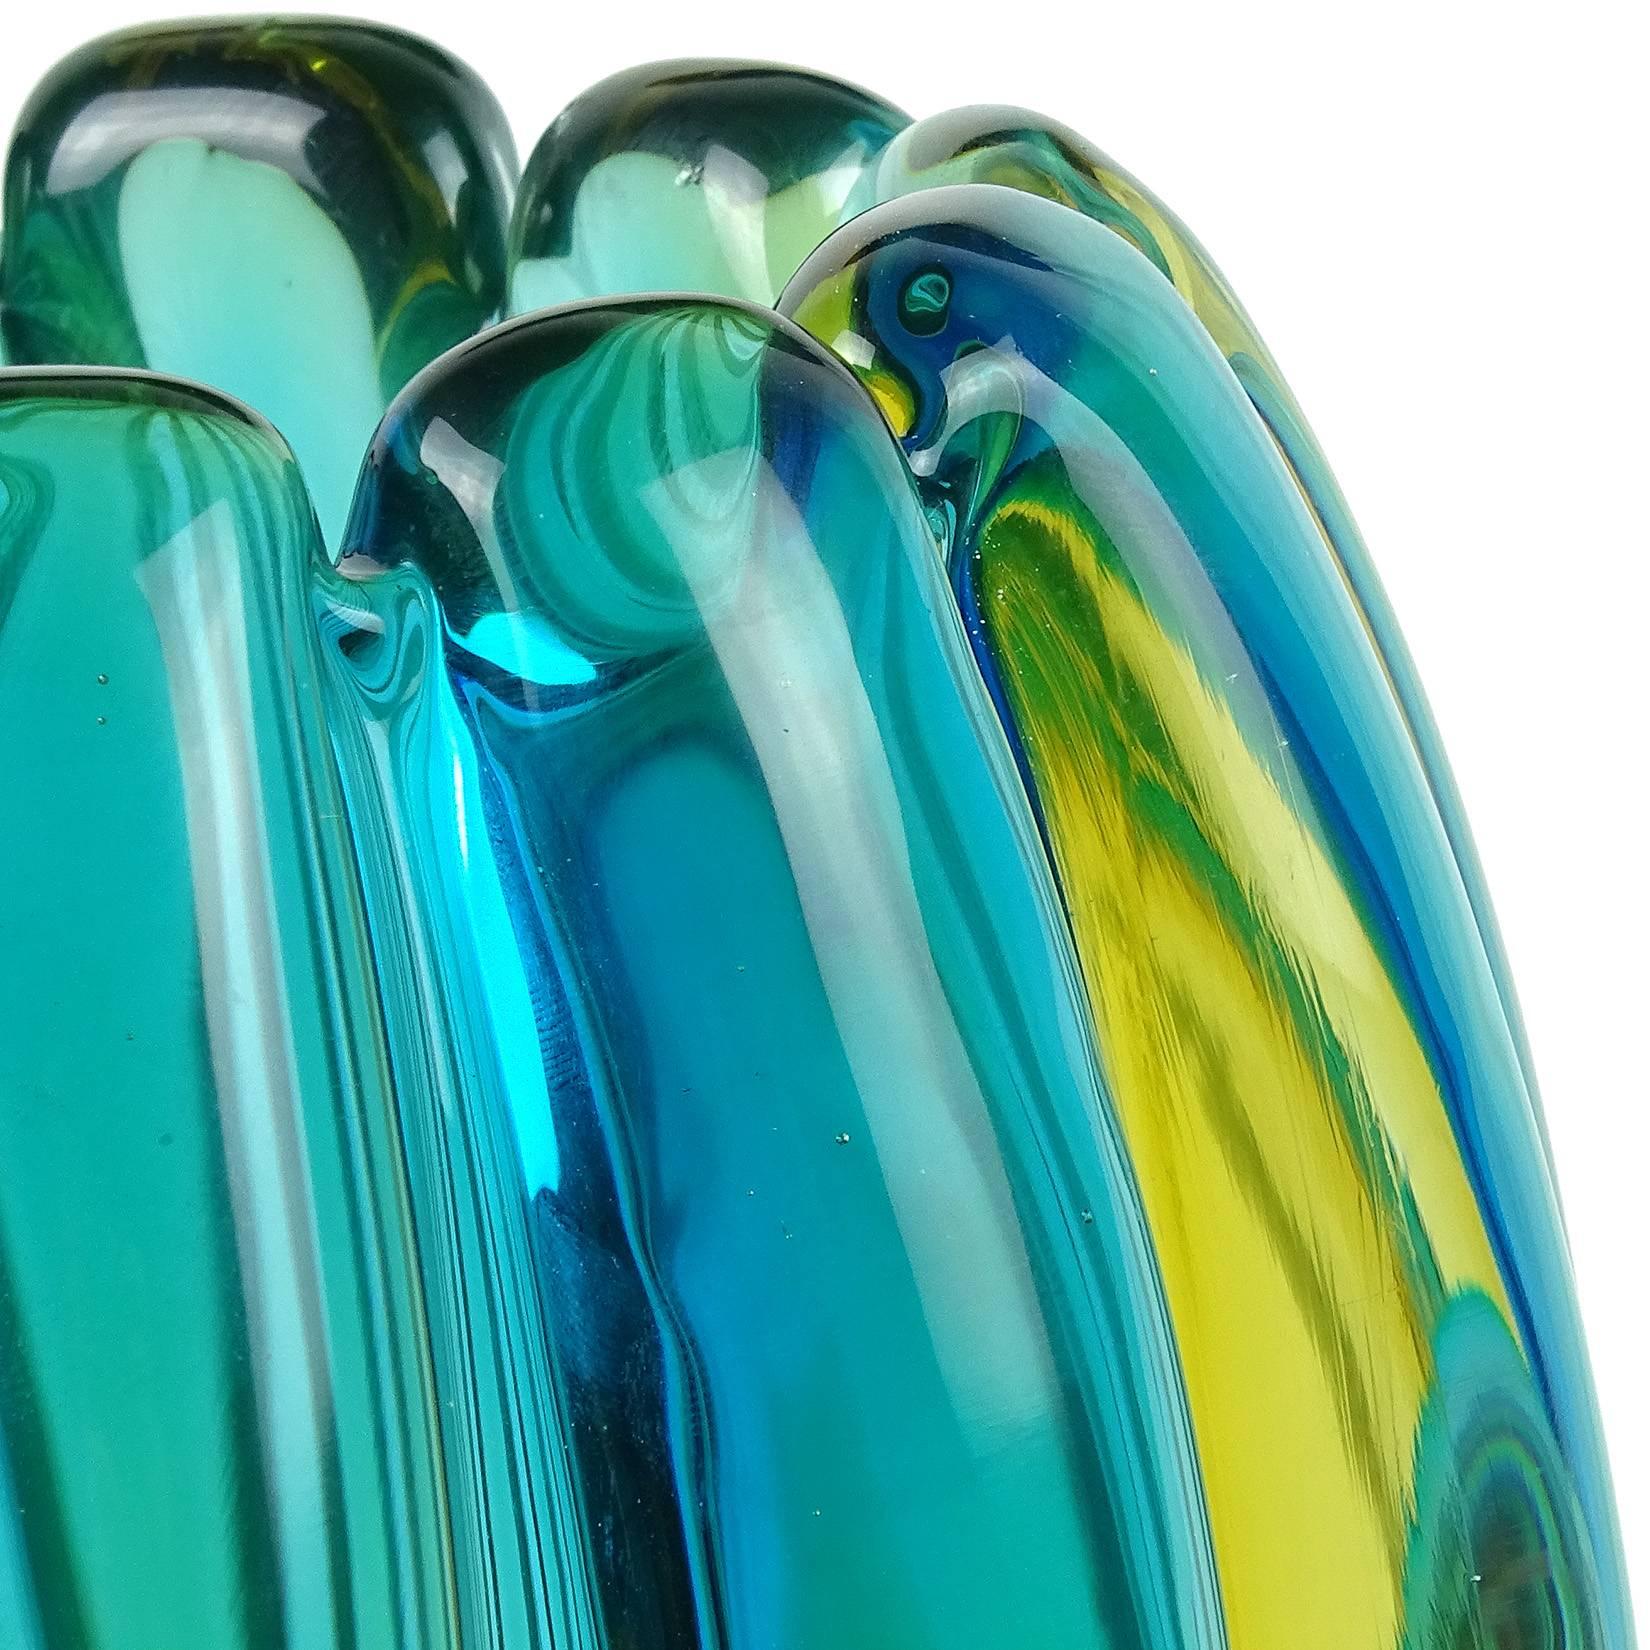 Free shipping worldwide! See details below description.

Beautiful Murano hand blown Sommerso blue, green and yellow art glass ribbed flower vase. Documented to designer Alfredo Barbini. Very thick piece with beautiful shape. Measures 9